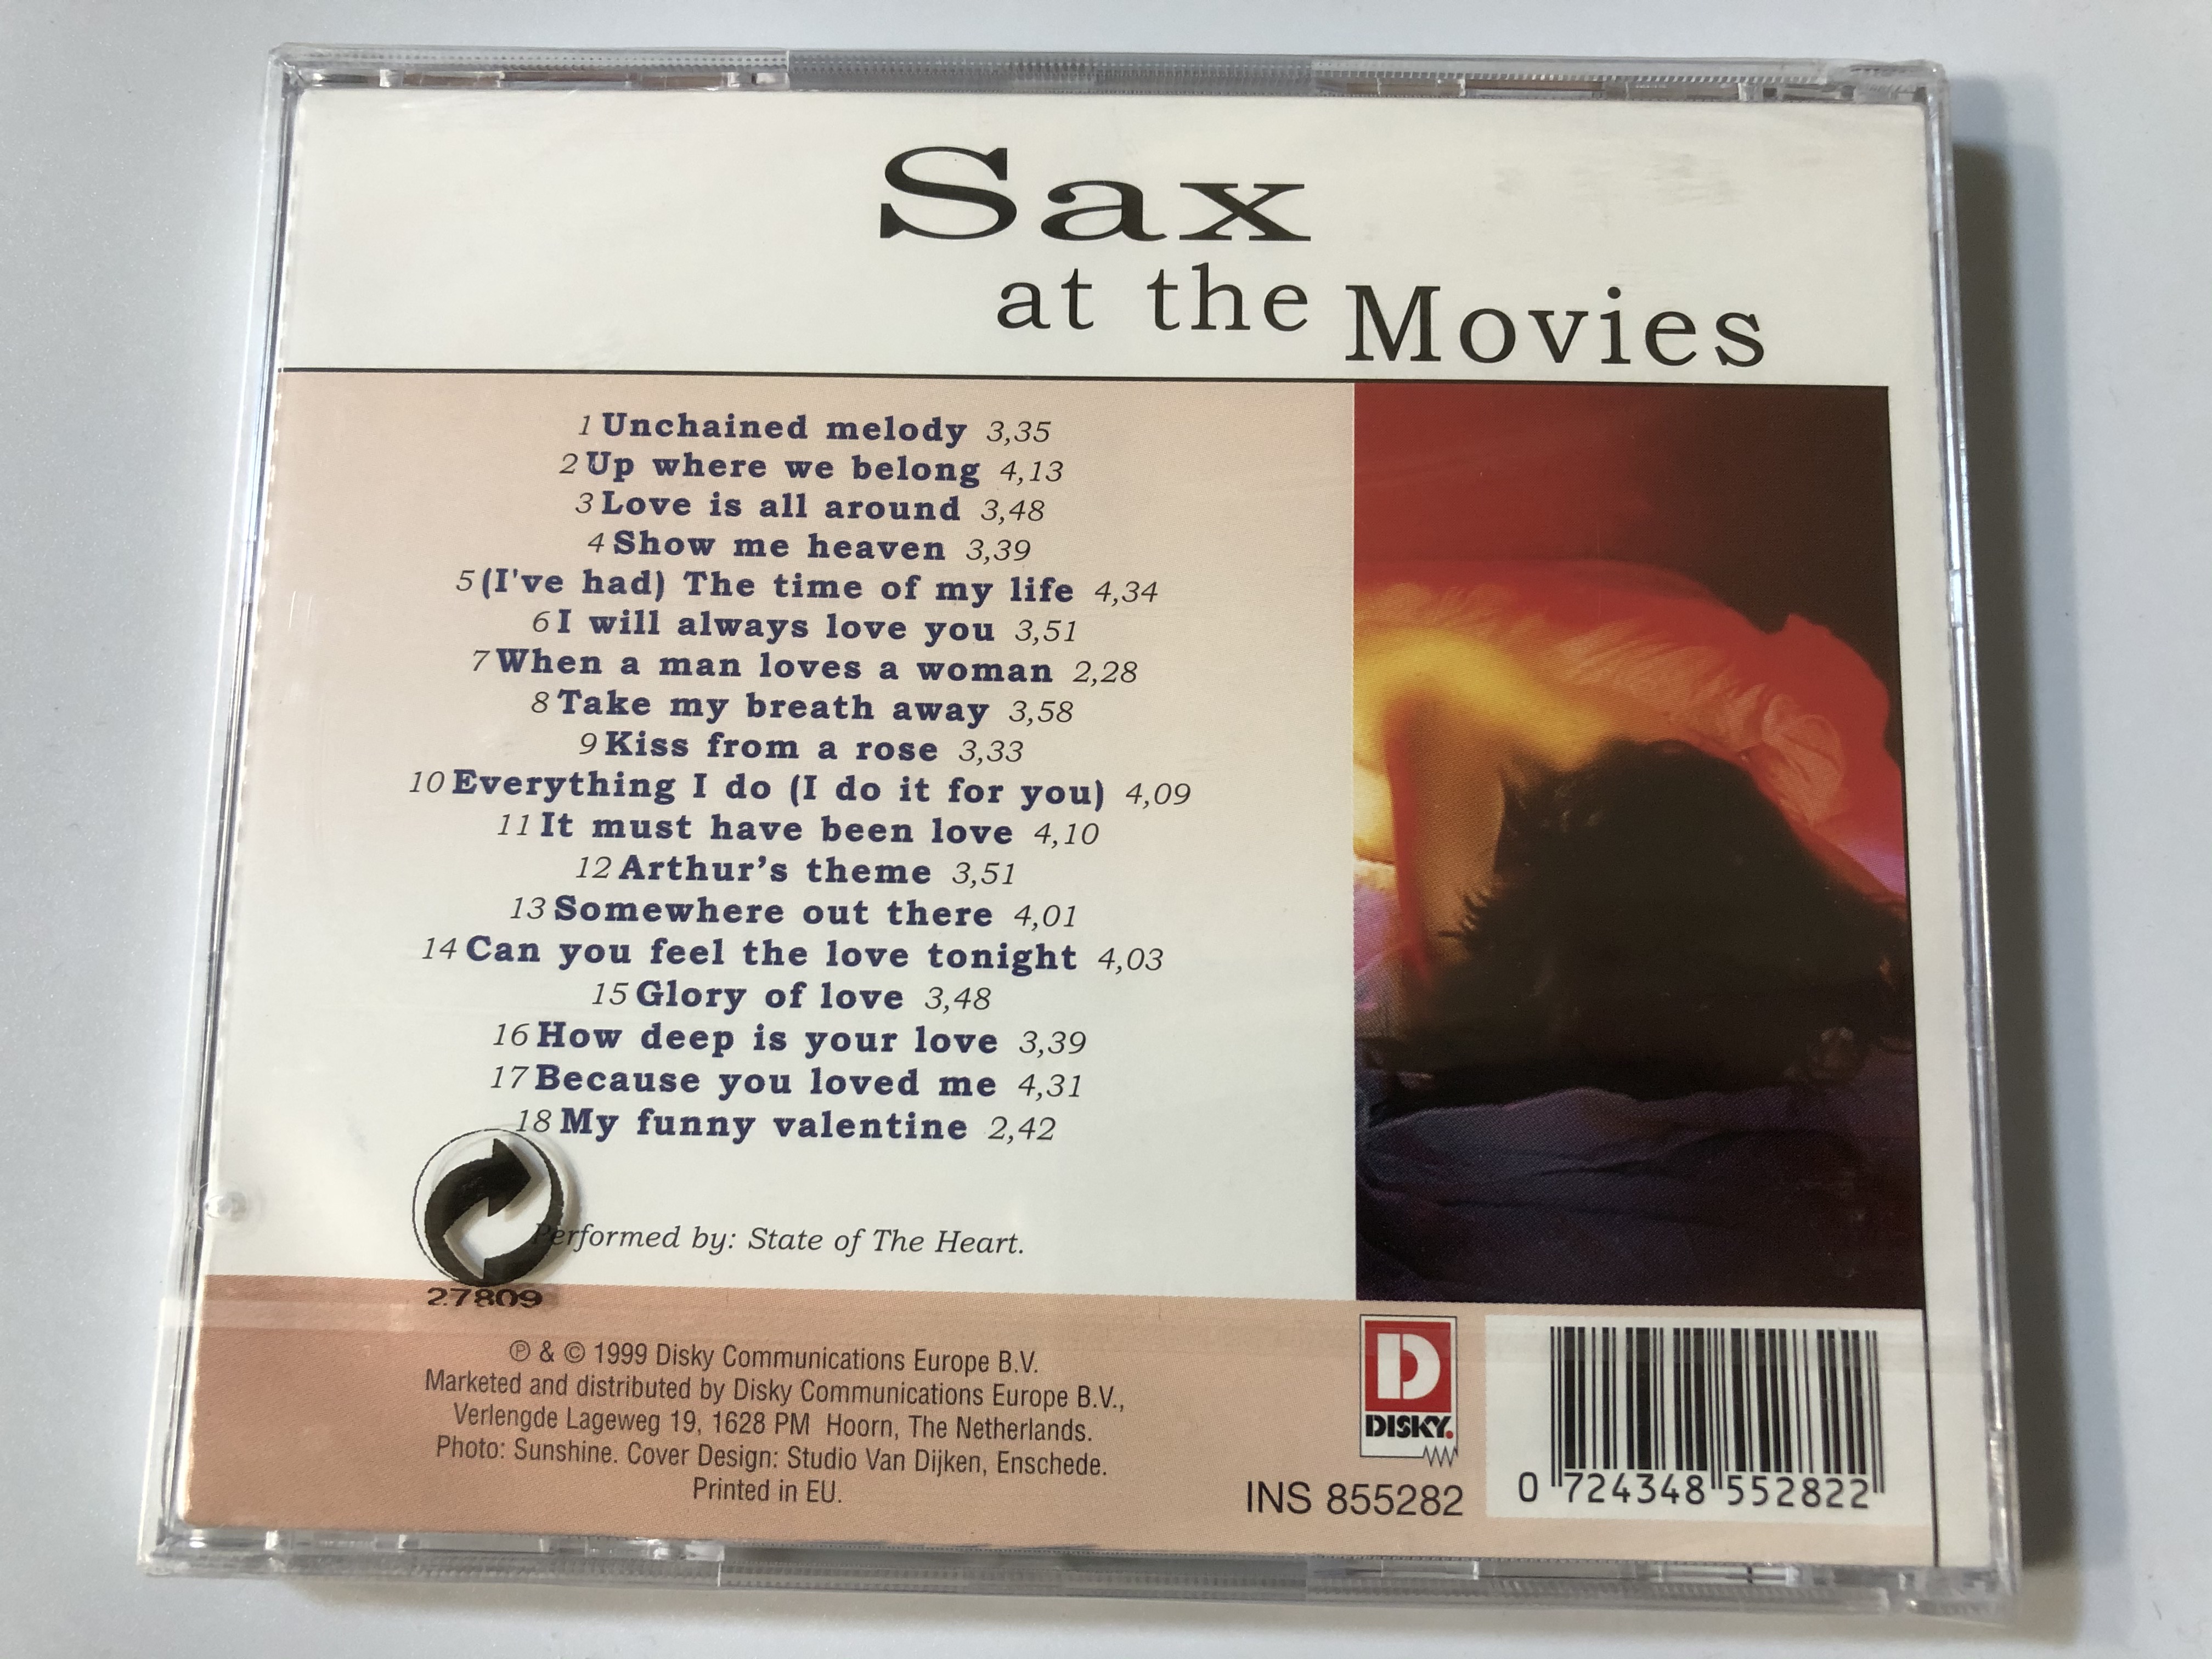 sax-at-the-movies-up-where-we-belong-show-me-heaven-take-my-breath-away-i-will-always-love-you-kiss-from-a-rose-disky-audio-cd-1999-ins-855282-2-.jpg